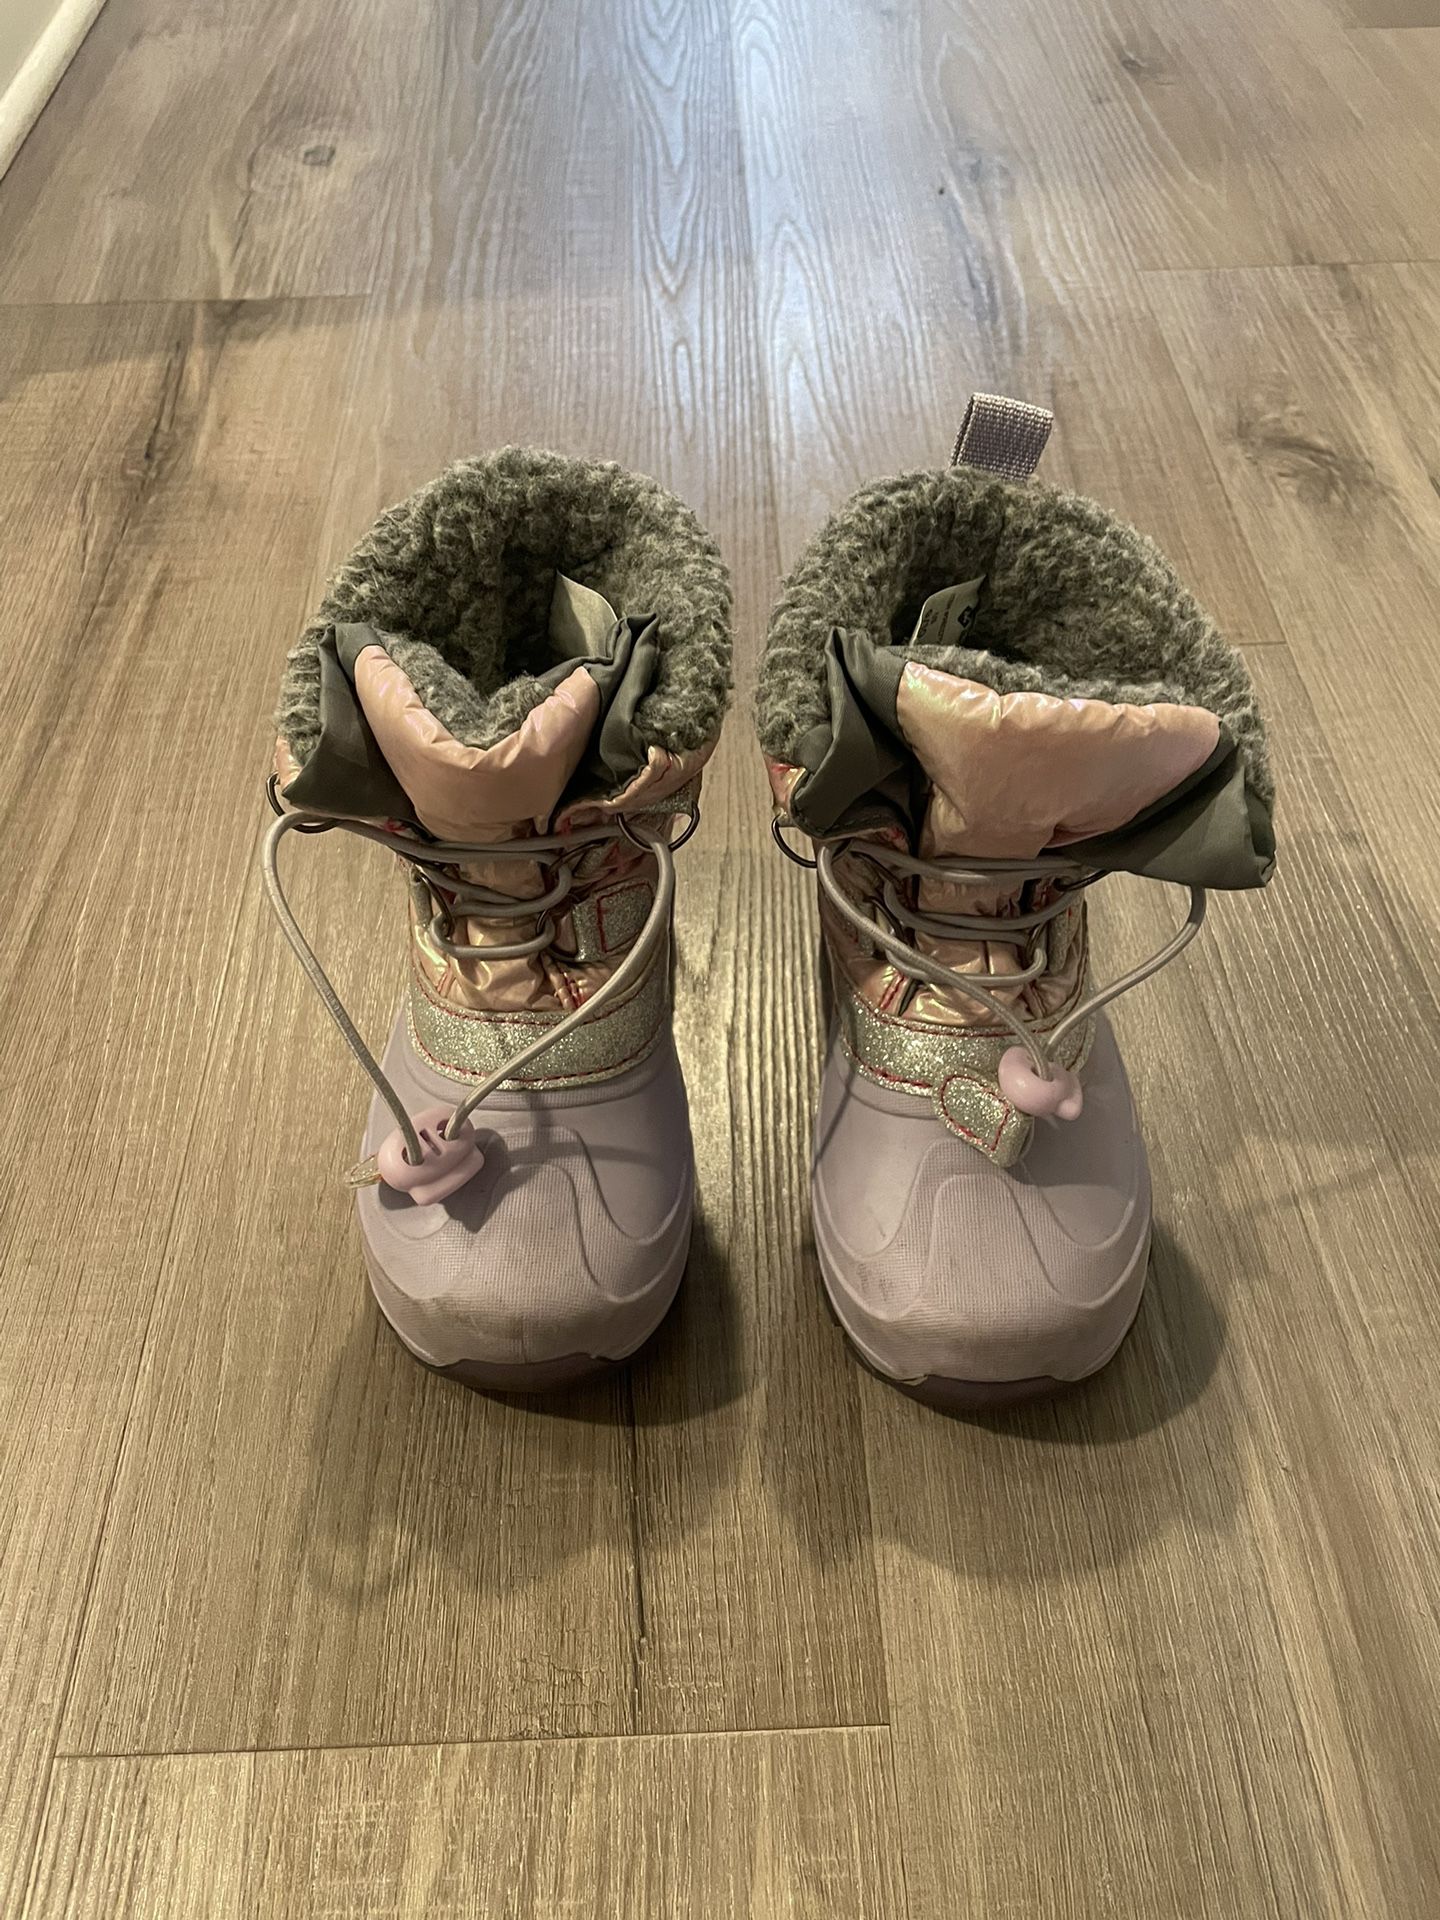 Girl Snow Boots Size 9/10